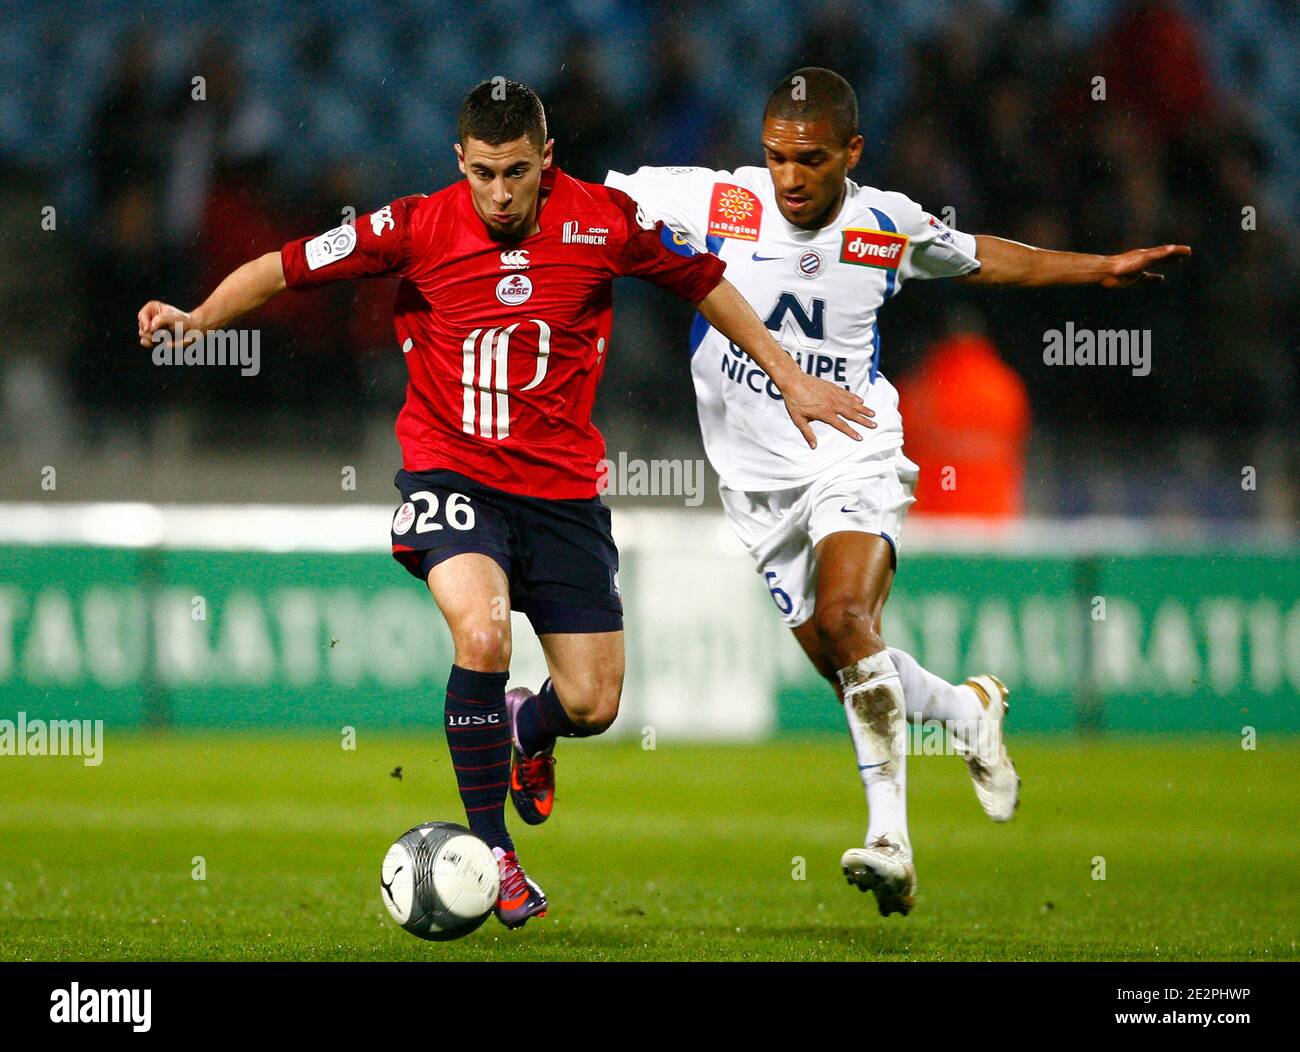 Lille's Eden Hazard fights for the ball with Montpellier's Joris Marveaux  during the French First League Soccer match, Lille OSC vs Montpellier HSC  at Lille Metropole Stadium in Lille, north of France